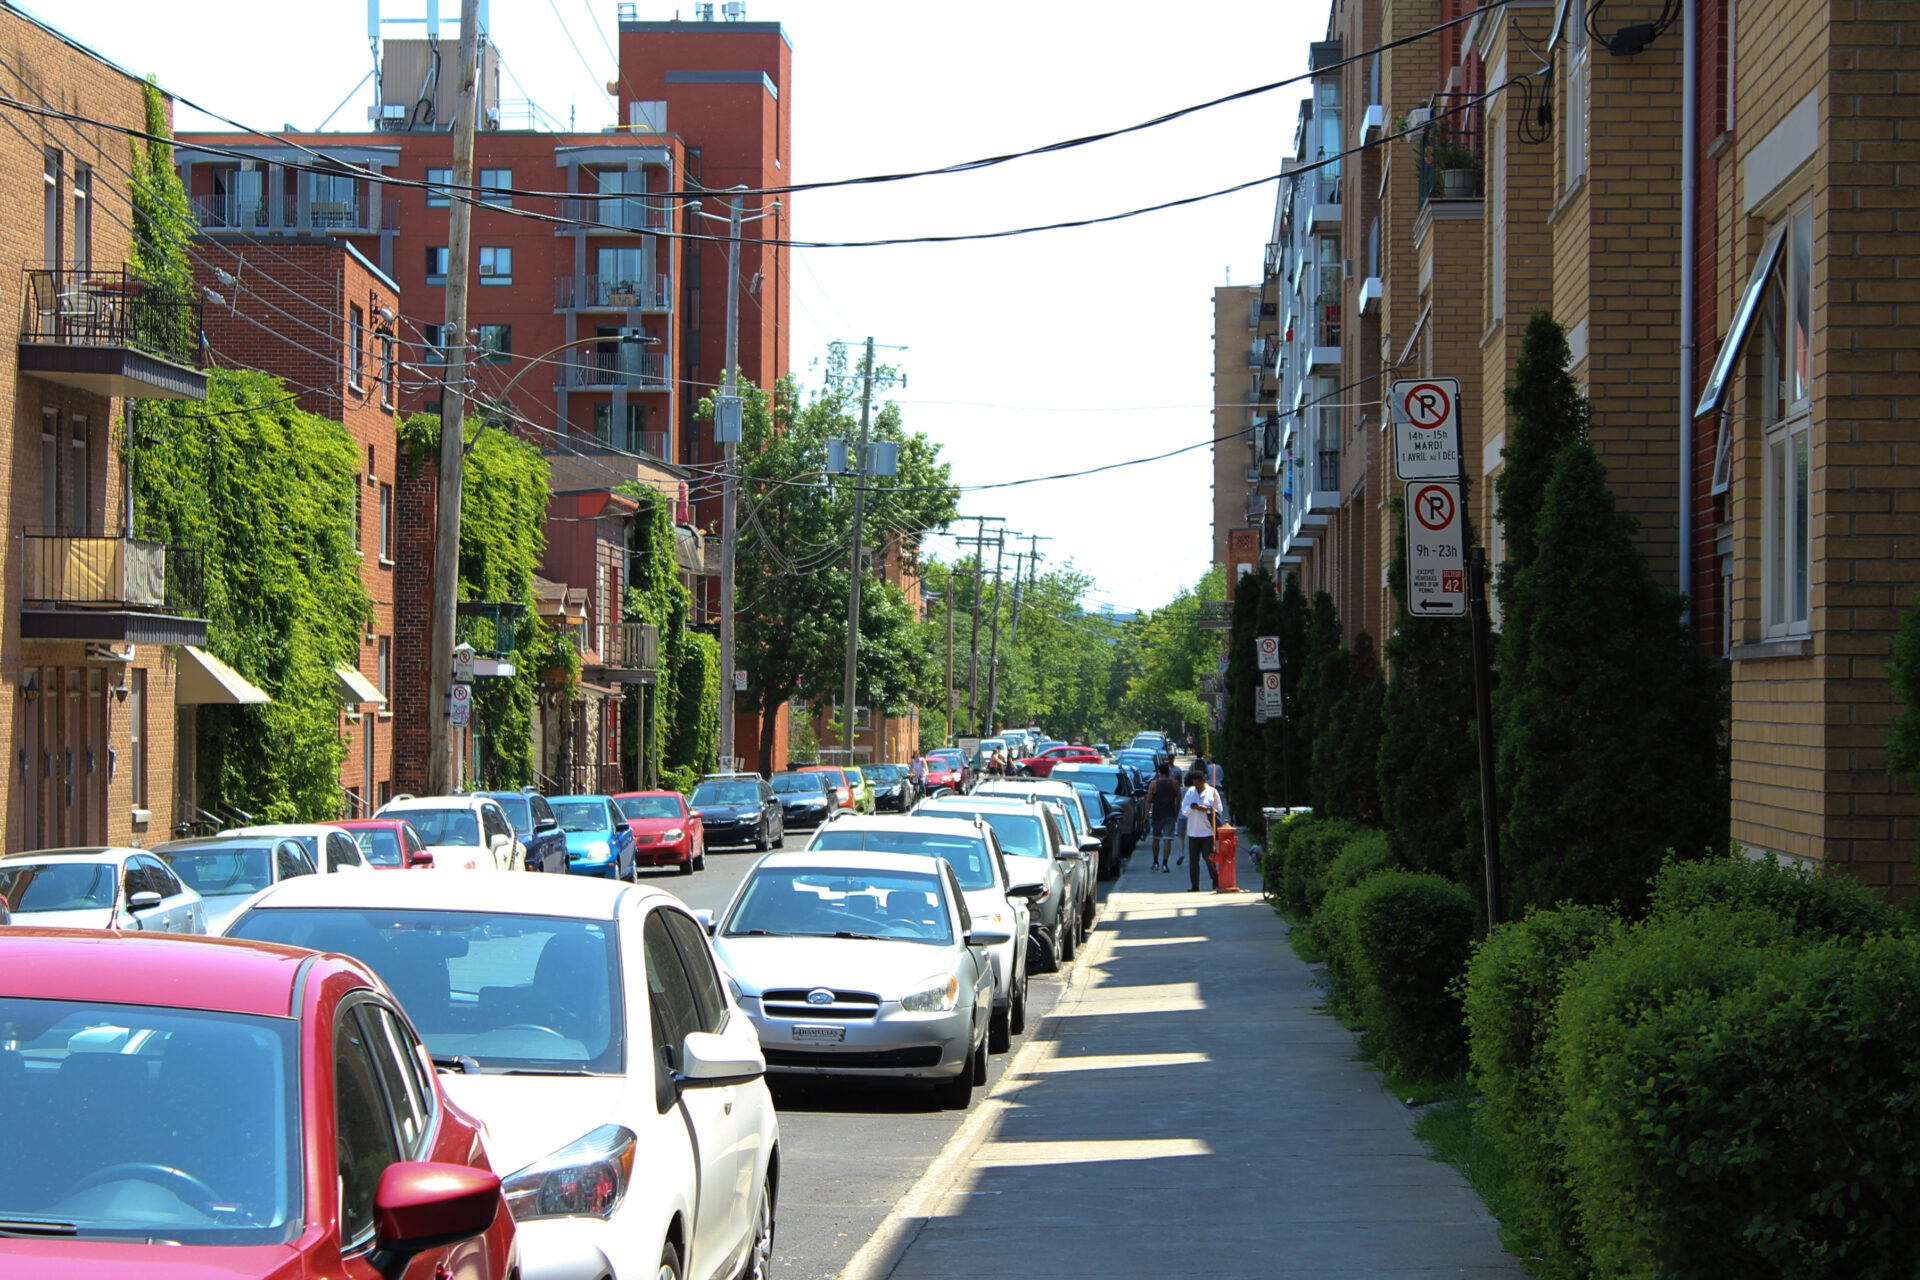 On a residential street, both sides are lined with a row of parked cars.